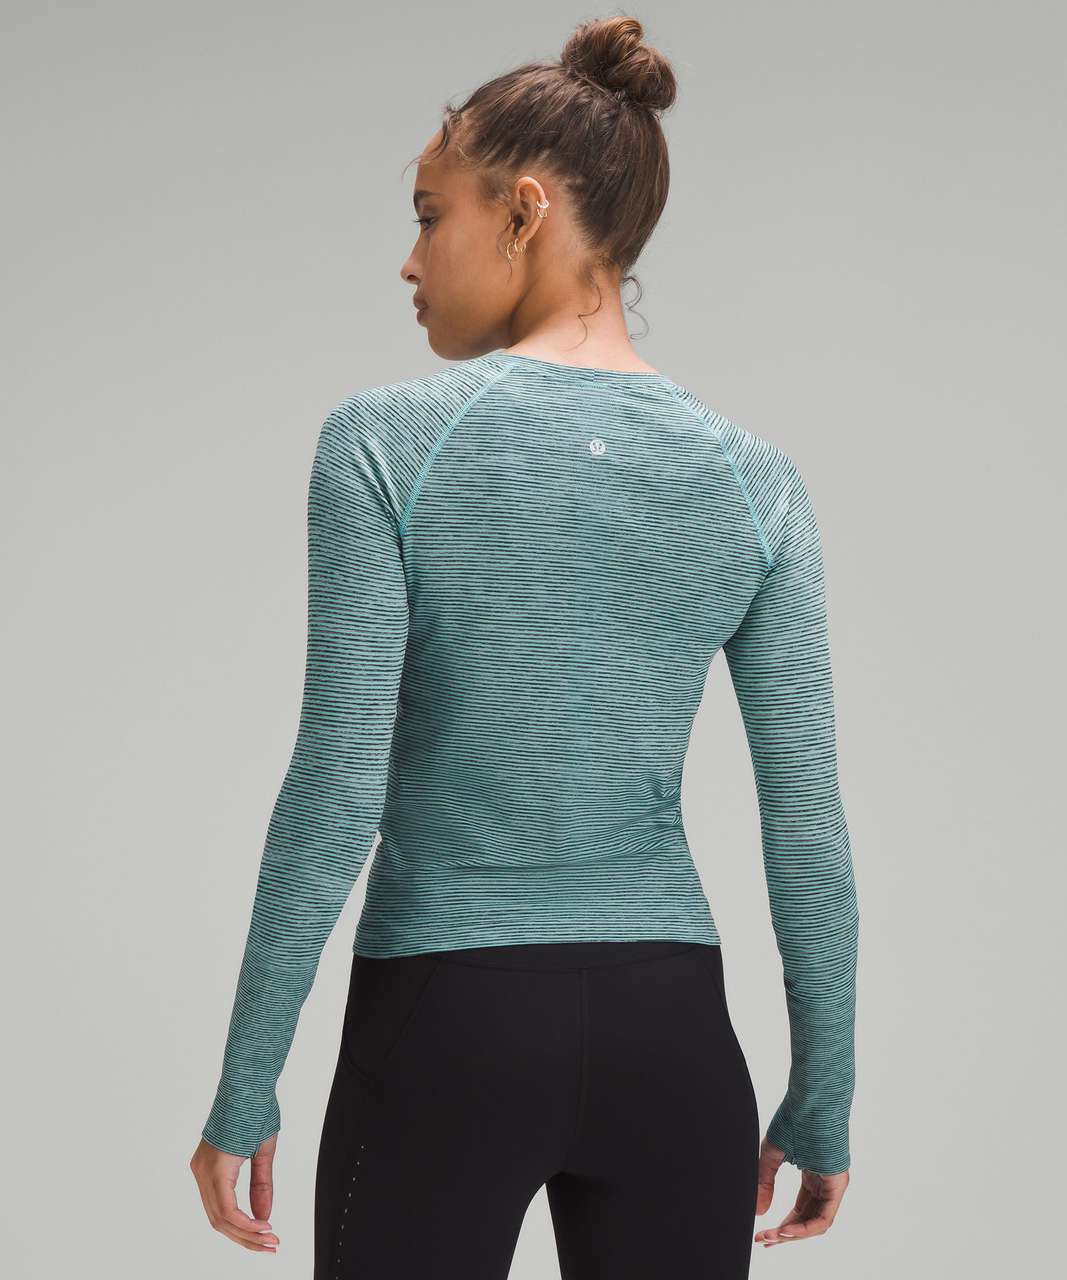 Lululemon Swiftly Tech Long-Sleeve Shirt 2.0 *Race Length - Wee Are From Space Tidal Teal